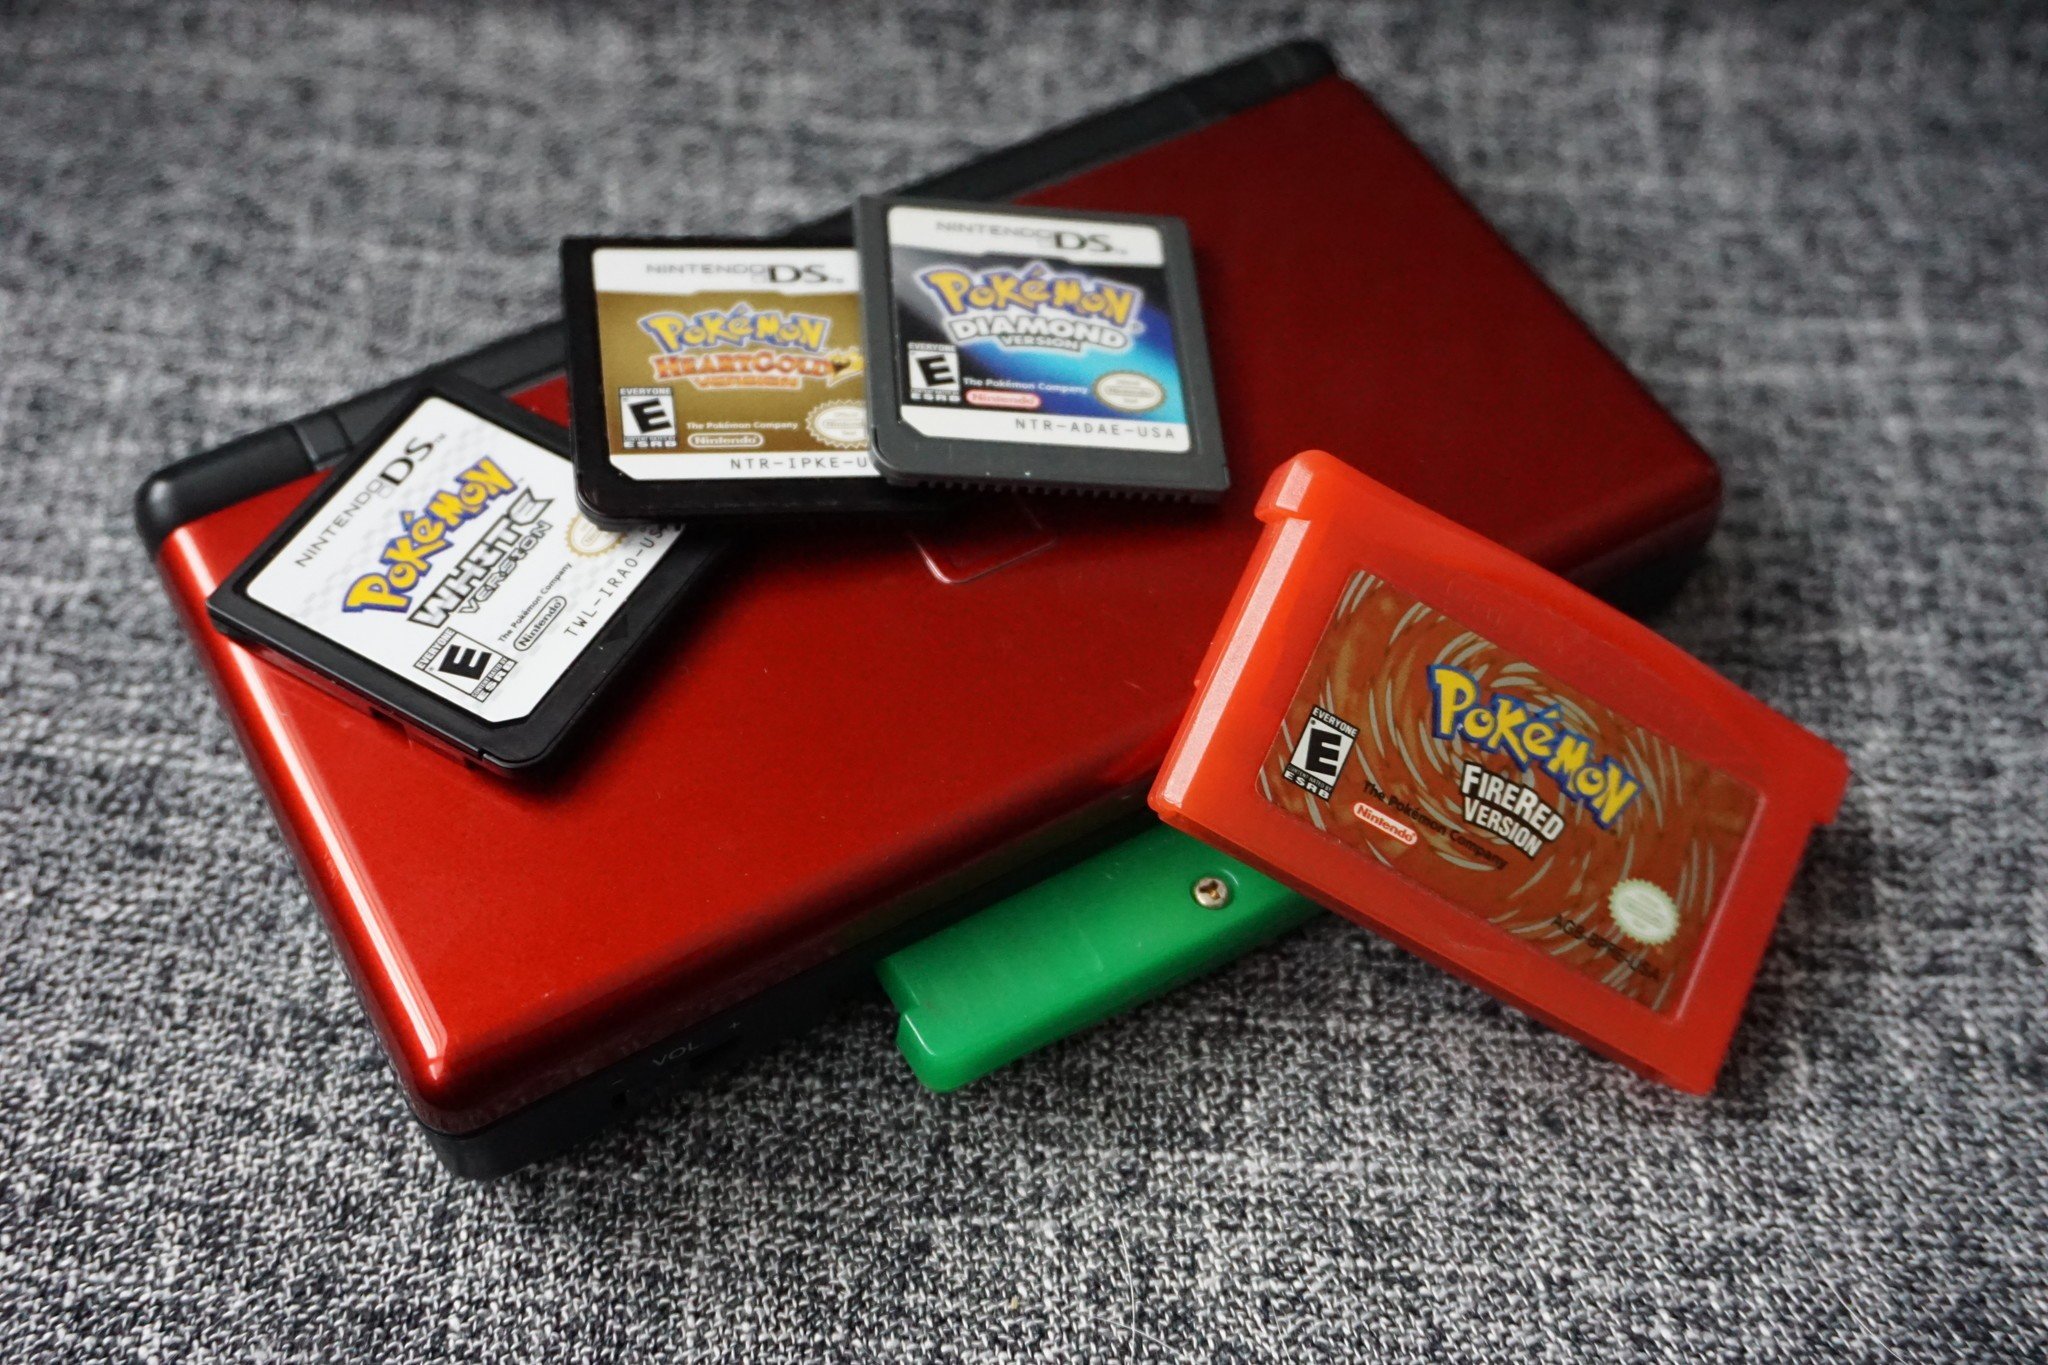 Pokemon Heart Gold & Emerald set / Nintendo DS NDS GBA/ Authentic